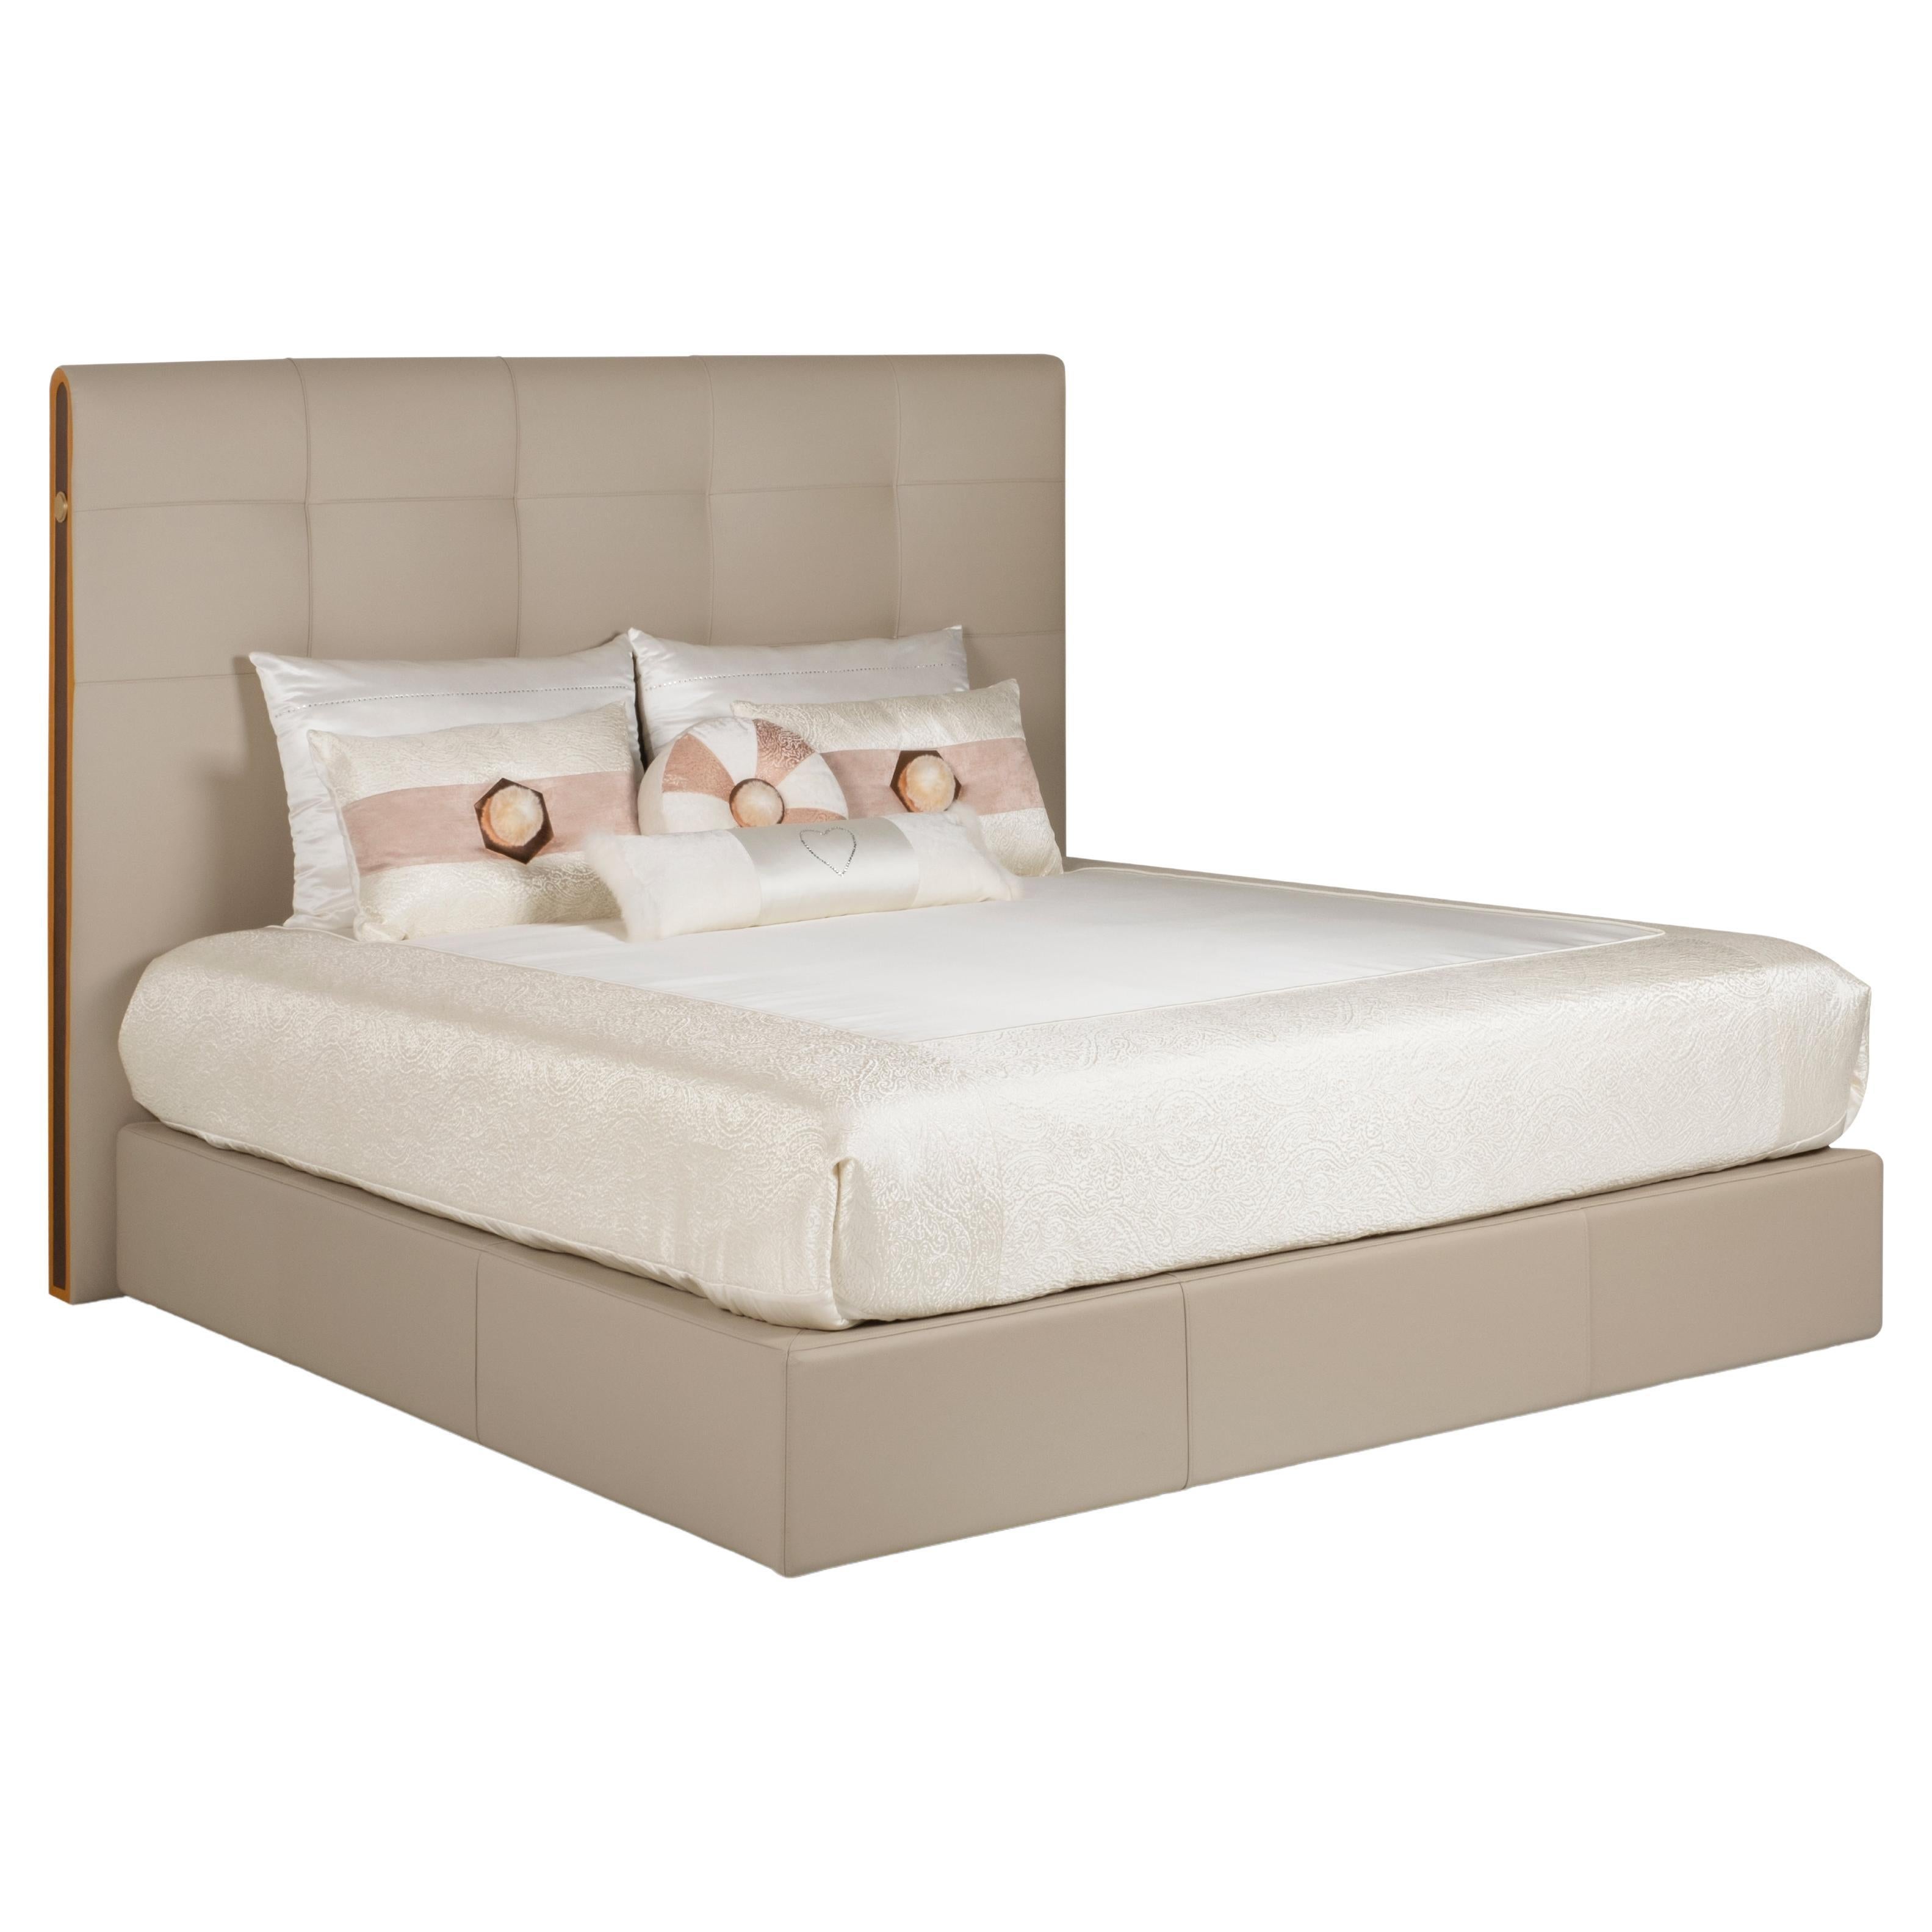 Modern Midnight Bed, Beige Italian Leather, Handmade in Portugal by Greenapple For Sale